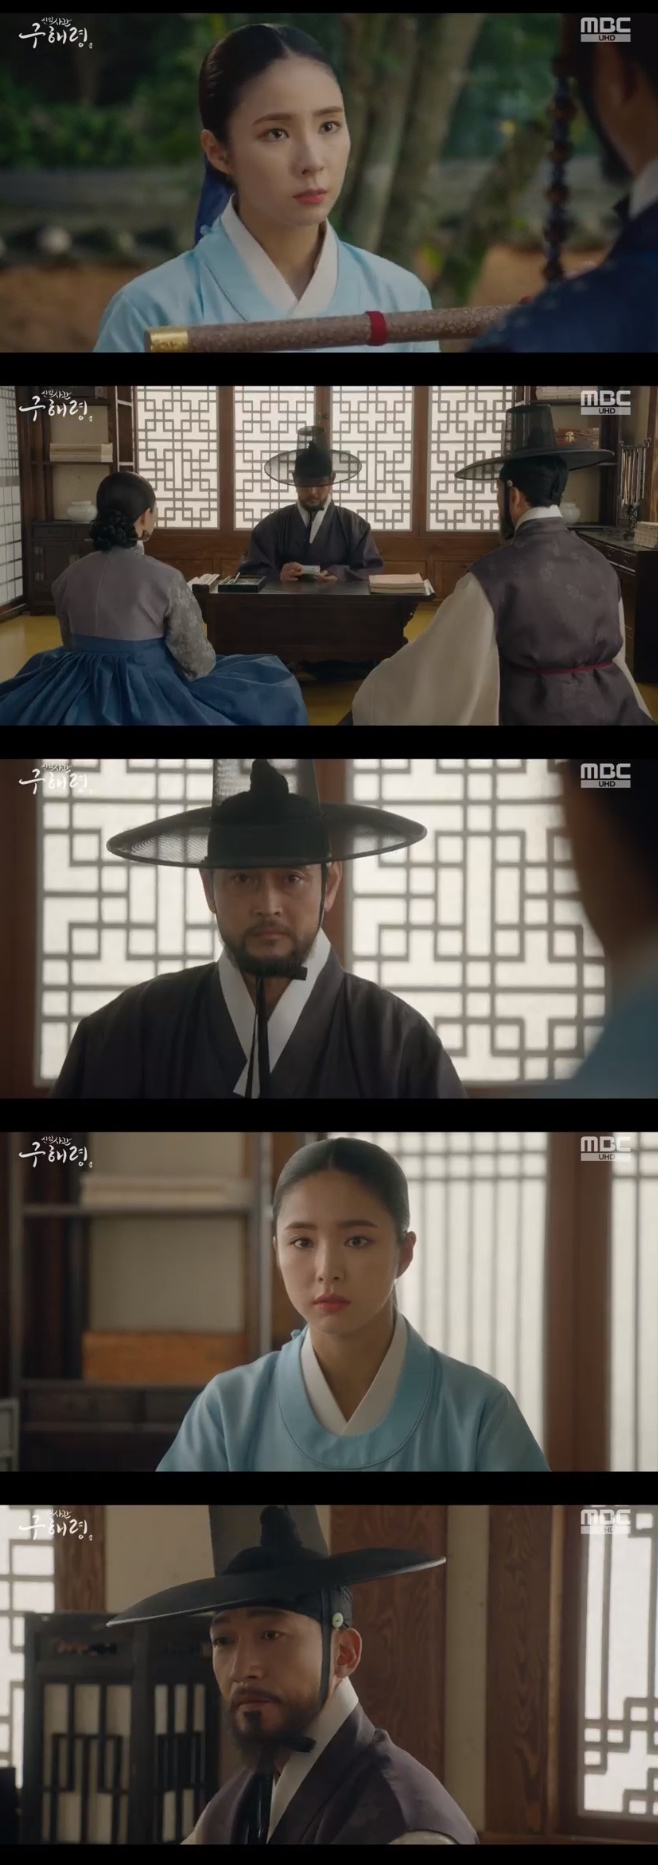 Shin Se-kyung in Newcomer Rookie Historian Goo Hae-ryung began planning to save Cha Eun-wooIn the final episode of the MBC drama The New Entrepreneur Rookie Historian Goo Hae-ryung (playplayplayed by Kim Ho-soo and director Kang Il-soo), which aired on the night of the 26th, Rookie Historian Goo Hae-ryung (Shin Se-kyung) was portrayed trying to find the truth about the incident 20 years ago.Earlier, Rookie Historian Goo Hae-ryung (Shin Se-kyung) raised the case 20 years ago to the surface by raising an appeal about Kim Il-moks head.Lee Eun-woo also sought Lee Jin (Park Ki-woong) and demanded the truth, but Lee Jin turned away and rather locked Lee Lim in the melted party.Rookie Historian Goo Hae-ryung visited the Green West to see the Irim, but was blocked and could not enter.He then found Koo Jae-kyung (Fairy Hwan) to find a solution.However, when asked about the details of the detailed article, Rookie Historian Goo Hae-ryung said, I saw the contents but I can not tell you.You should not disclose it to anyone.Rookie Historian Goo Hae-ryung then said: Oraberney lost his teacher, but I lost my father; the charger closed his ears and the rust party was blocked by the army.If you have a plan, tell me, he added. If you are going to correct the case 20 years ago, I will be with you.